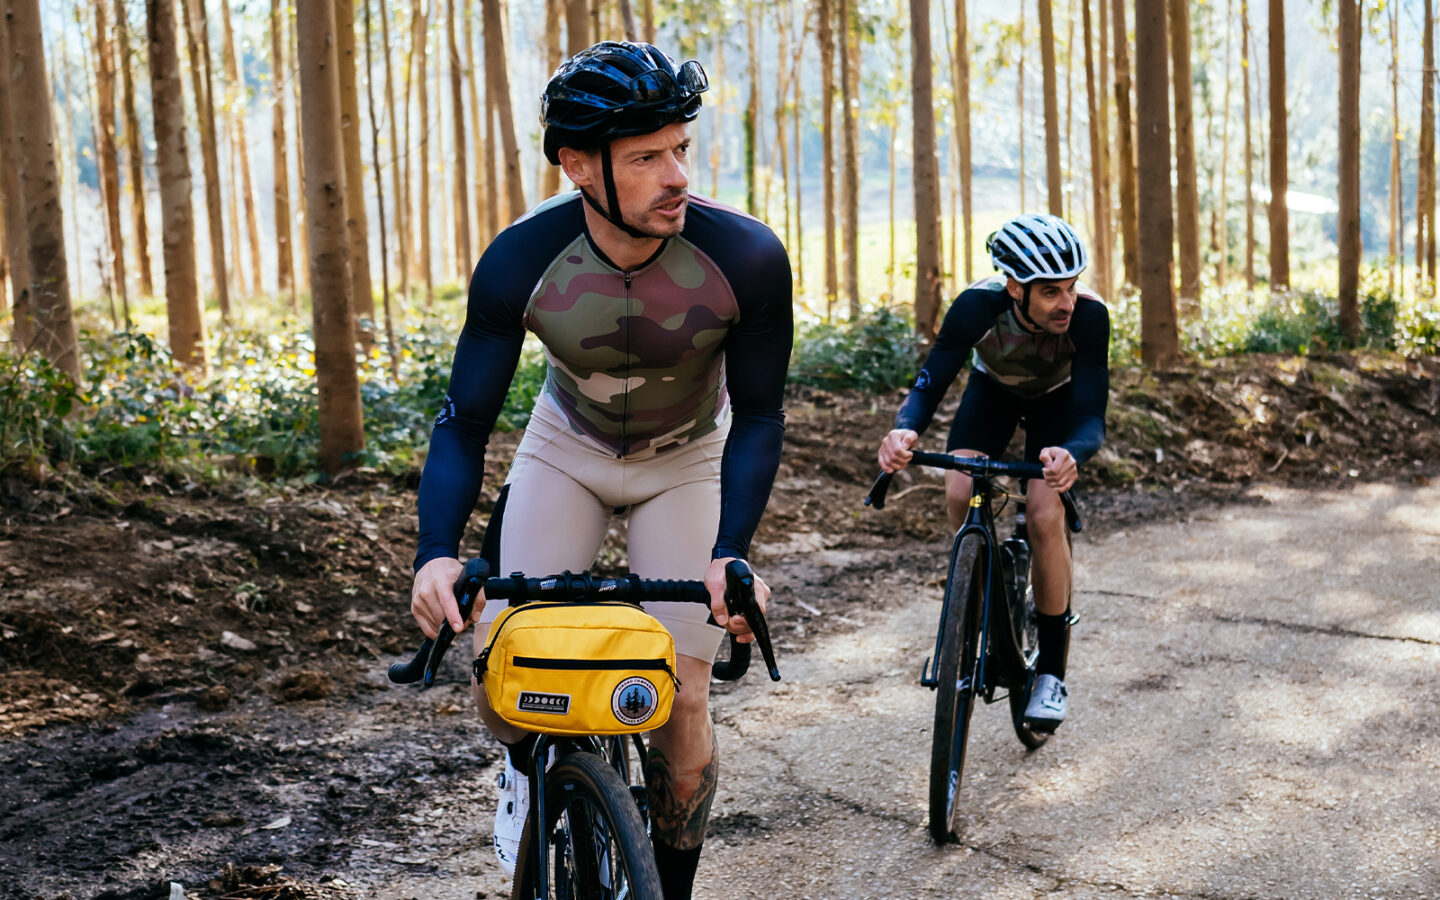 Siroko gravel cycling apparel: Design, comfort and resistance on